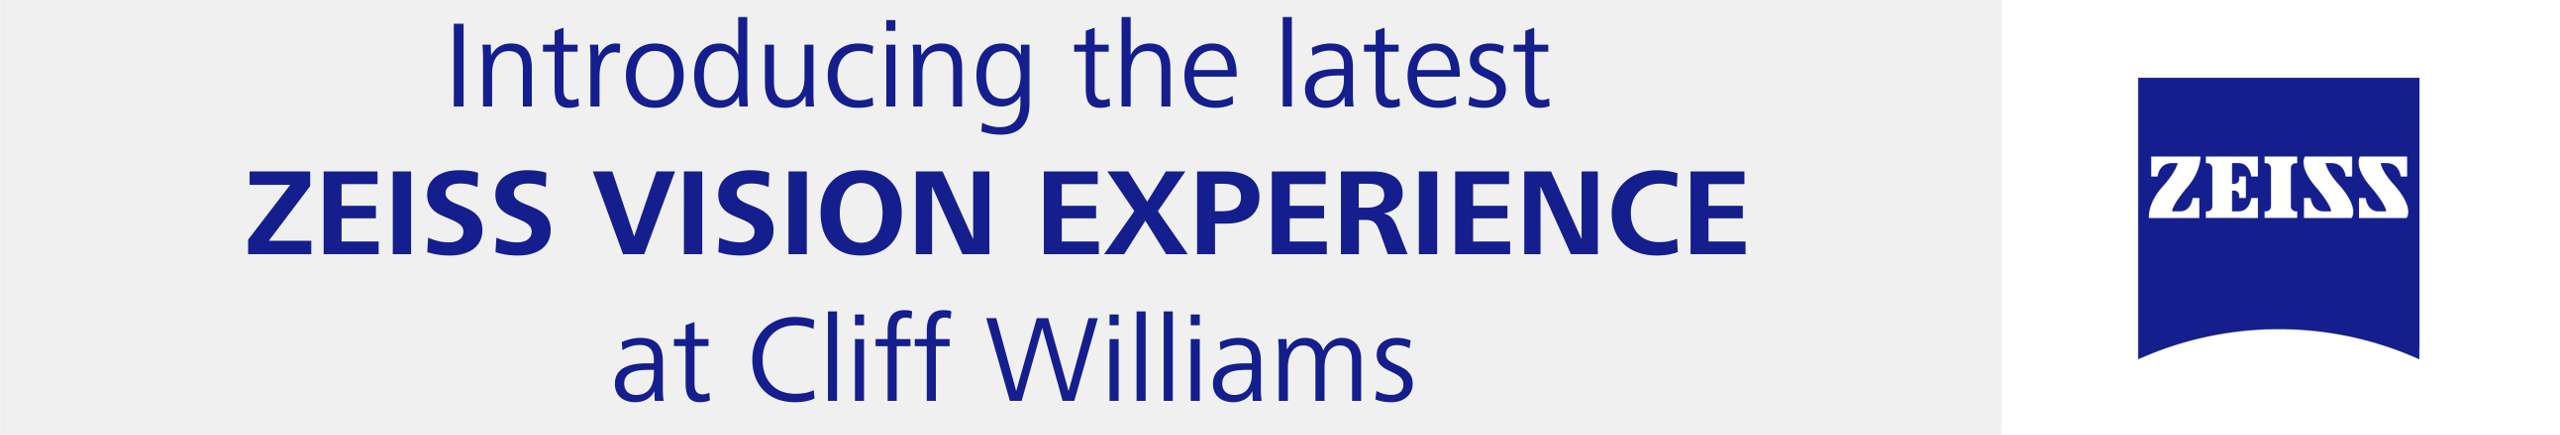 Introducing the latest ZEISS Vision experience at Cliff Williams